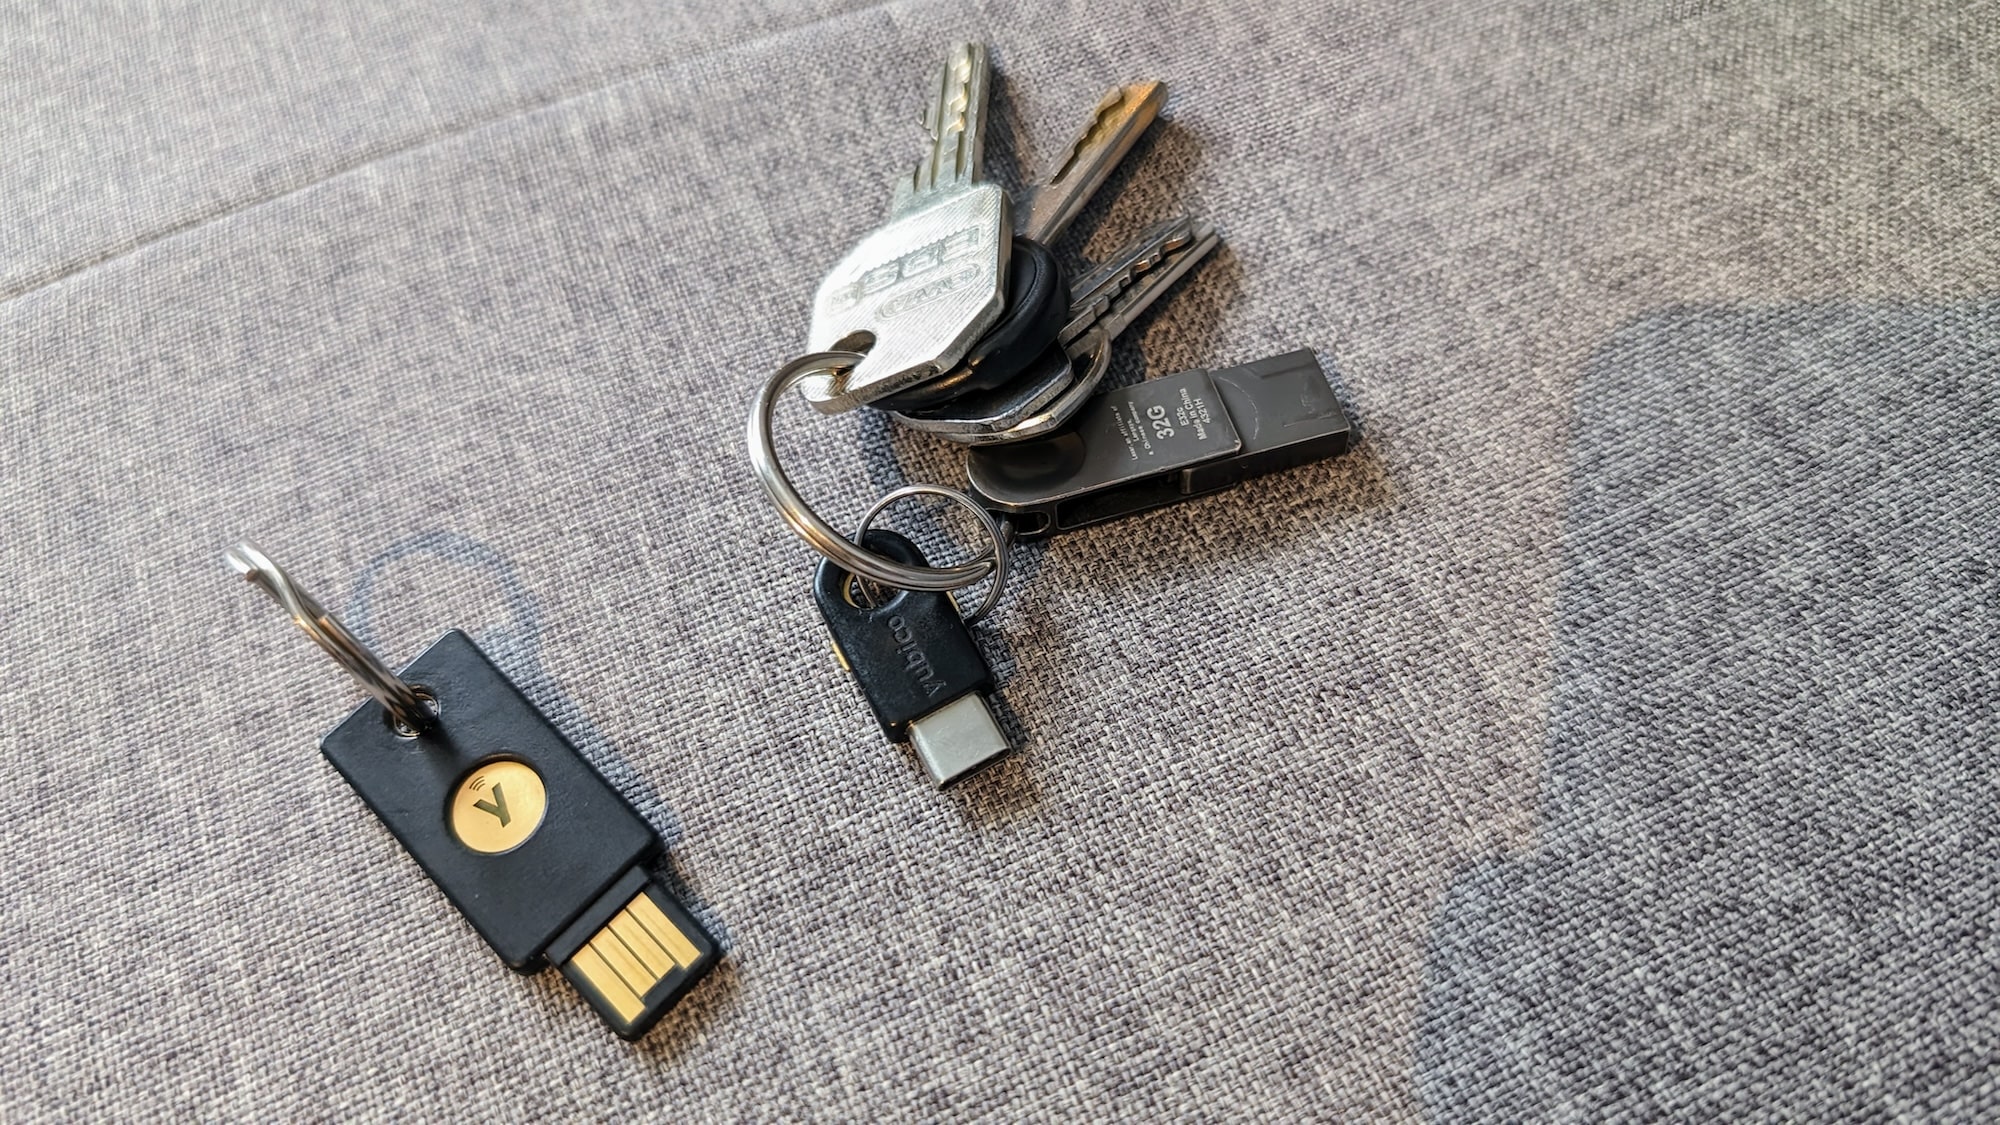 Separate YubiKeys for personal and work